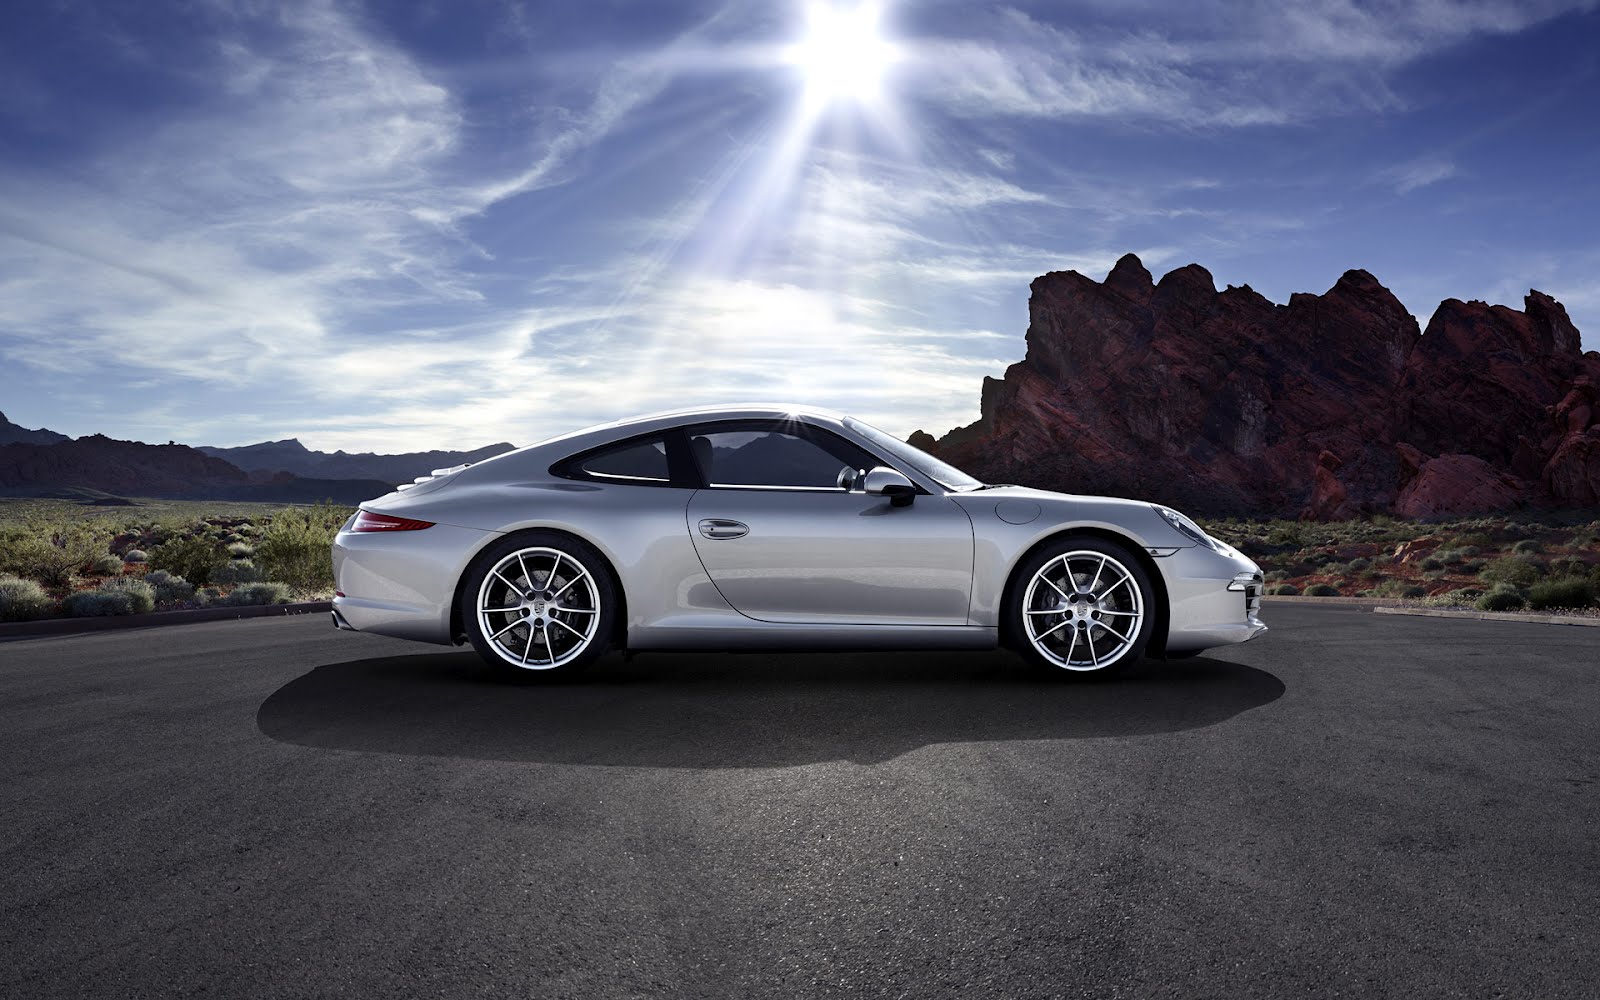 Porsche hd wallpapers Porsche hd wallpaper Porsche hd wallpapers